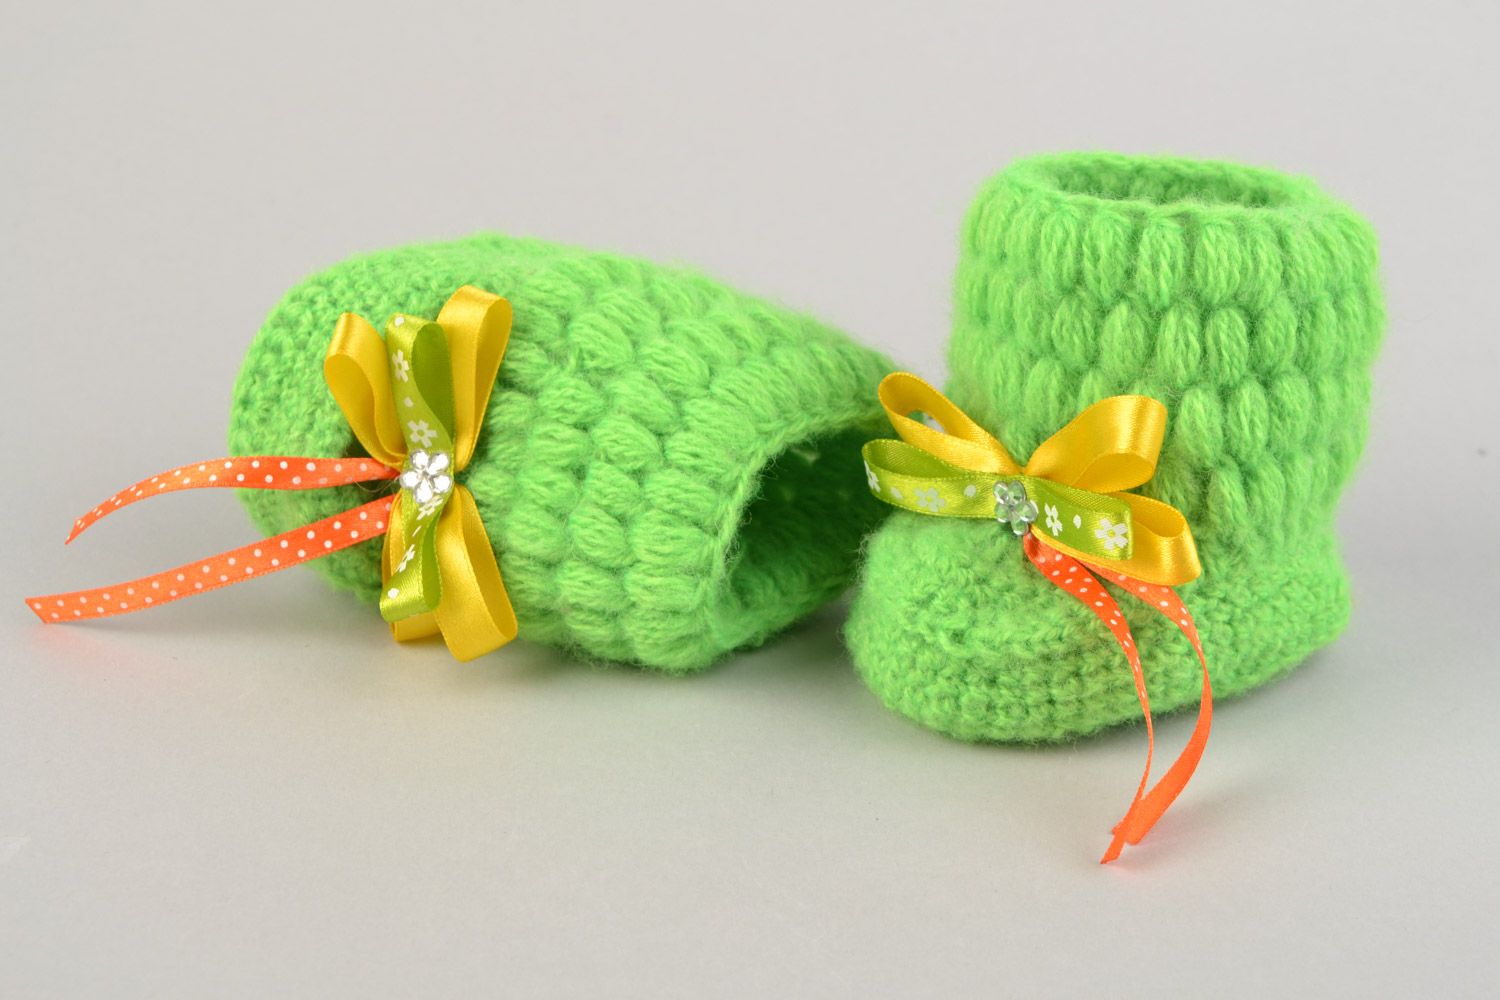 Light green hand-crocheted beautiful baby booties made of angora threads with bows photo 1